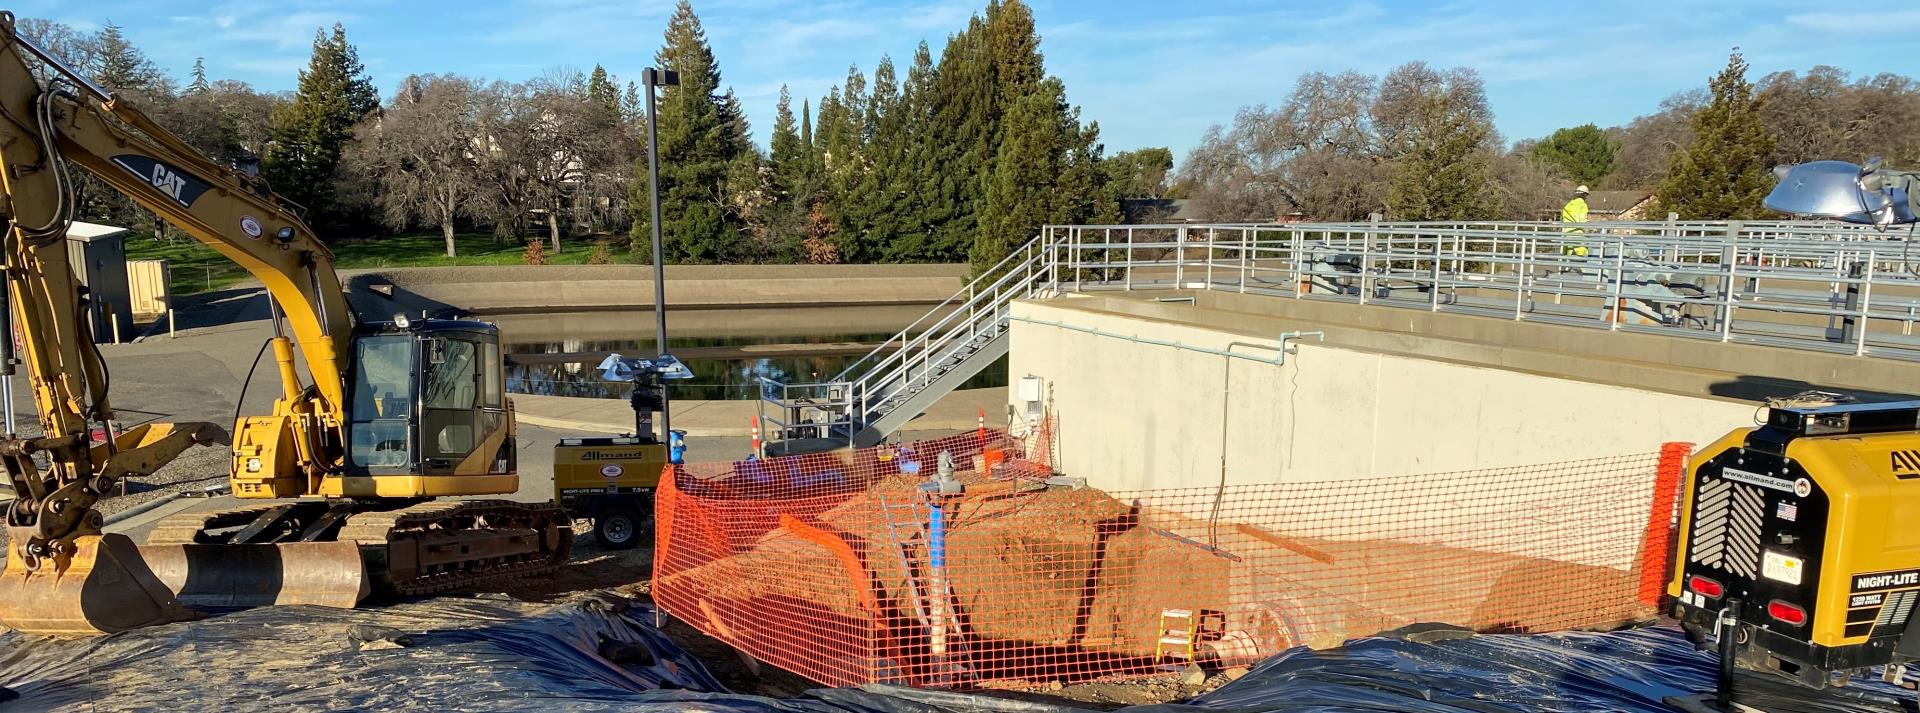 Construction work in progress as part of project at Water Treatment Plant